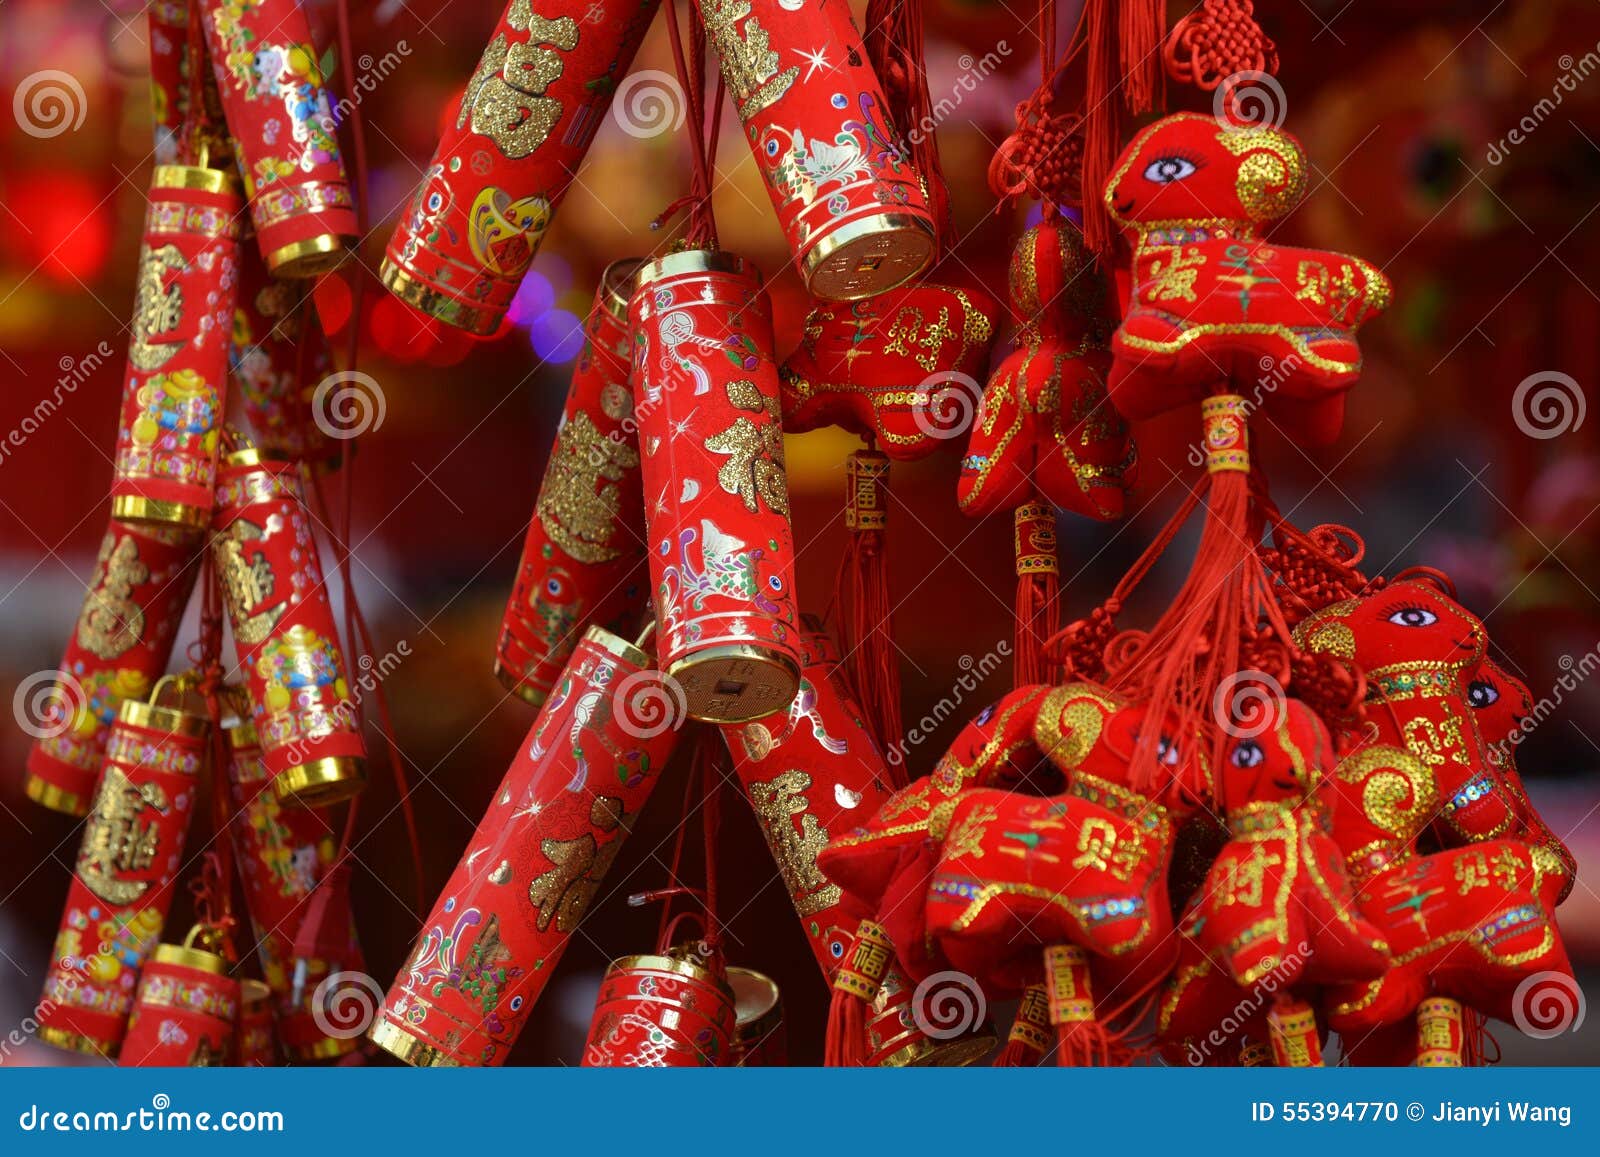 Red Lanterns, Red Firecrackers, Red Pepper, Red Everyone, Red Chinese ...